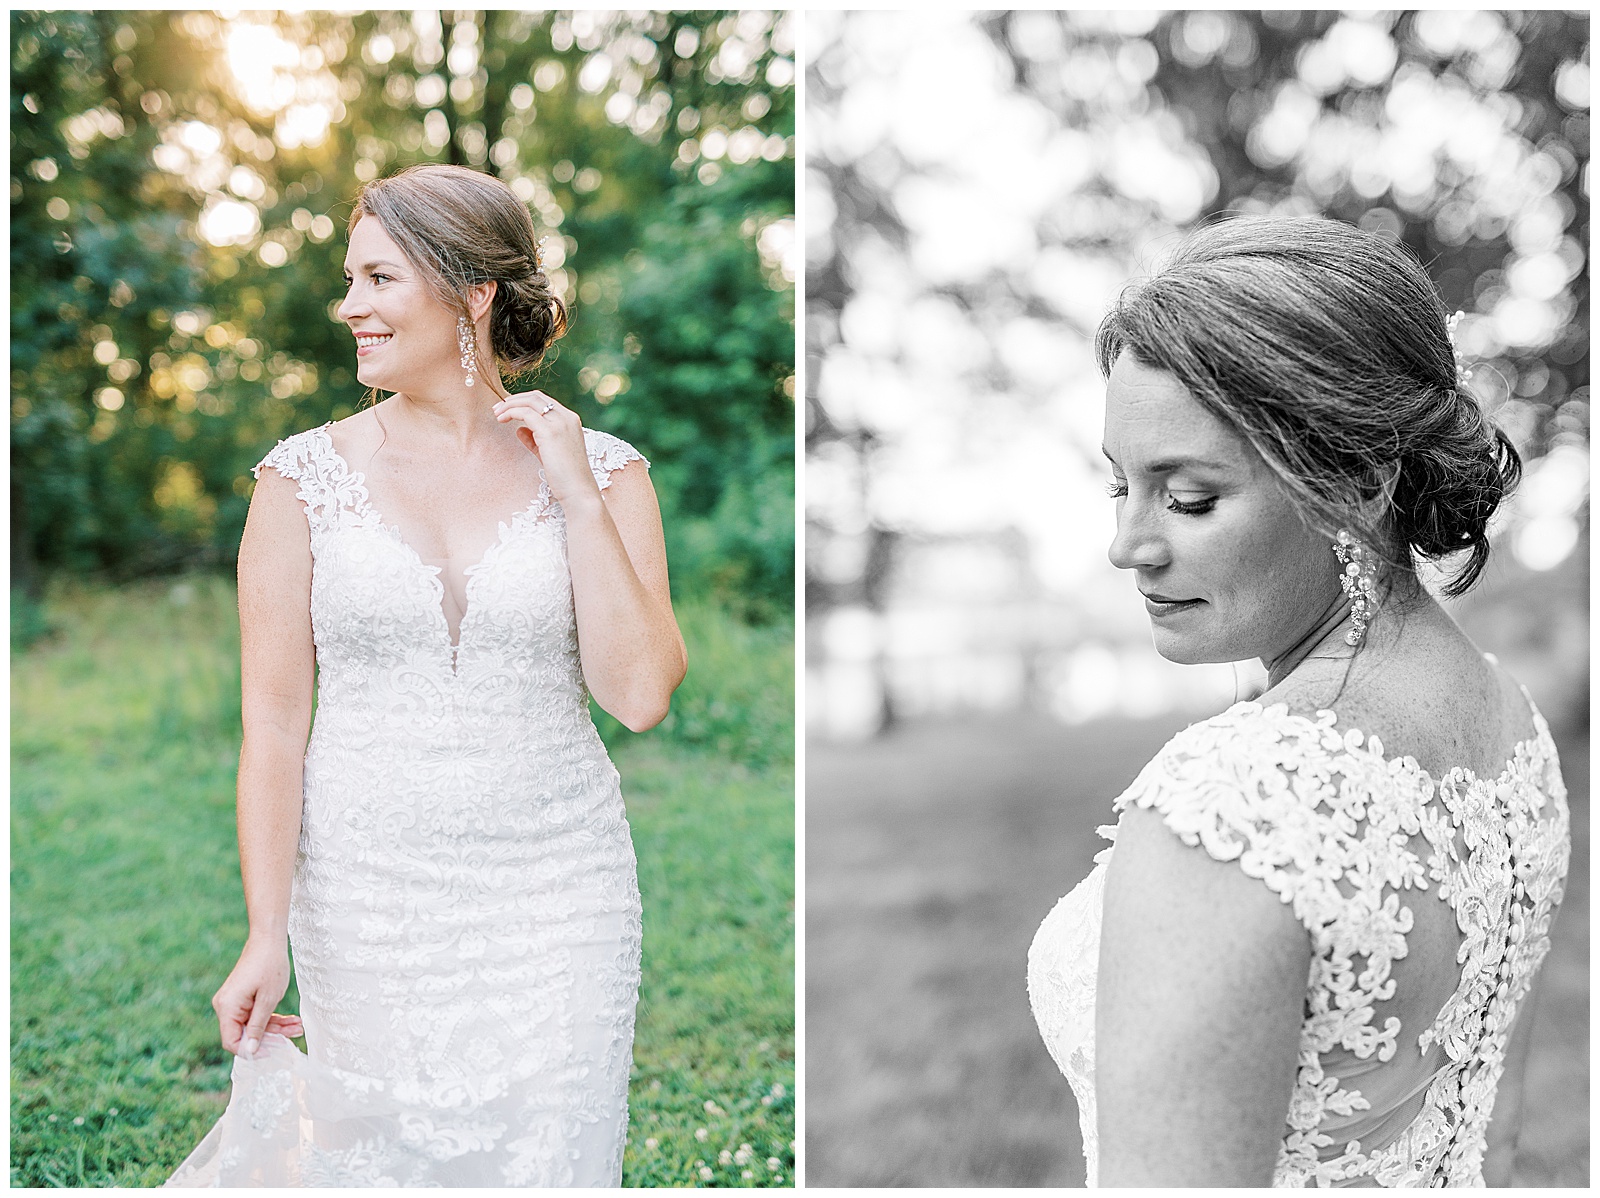 lace wedding dress from sunset bridal portraits in woods and field